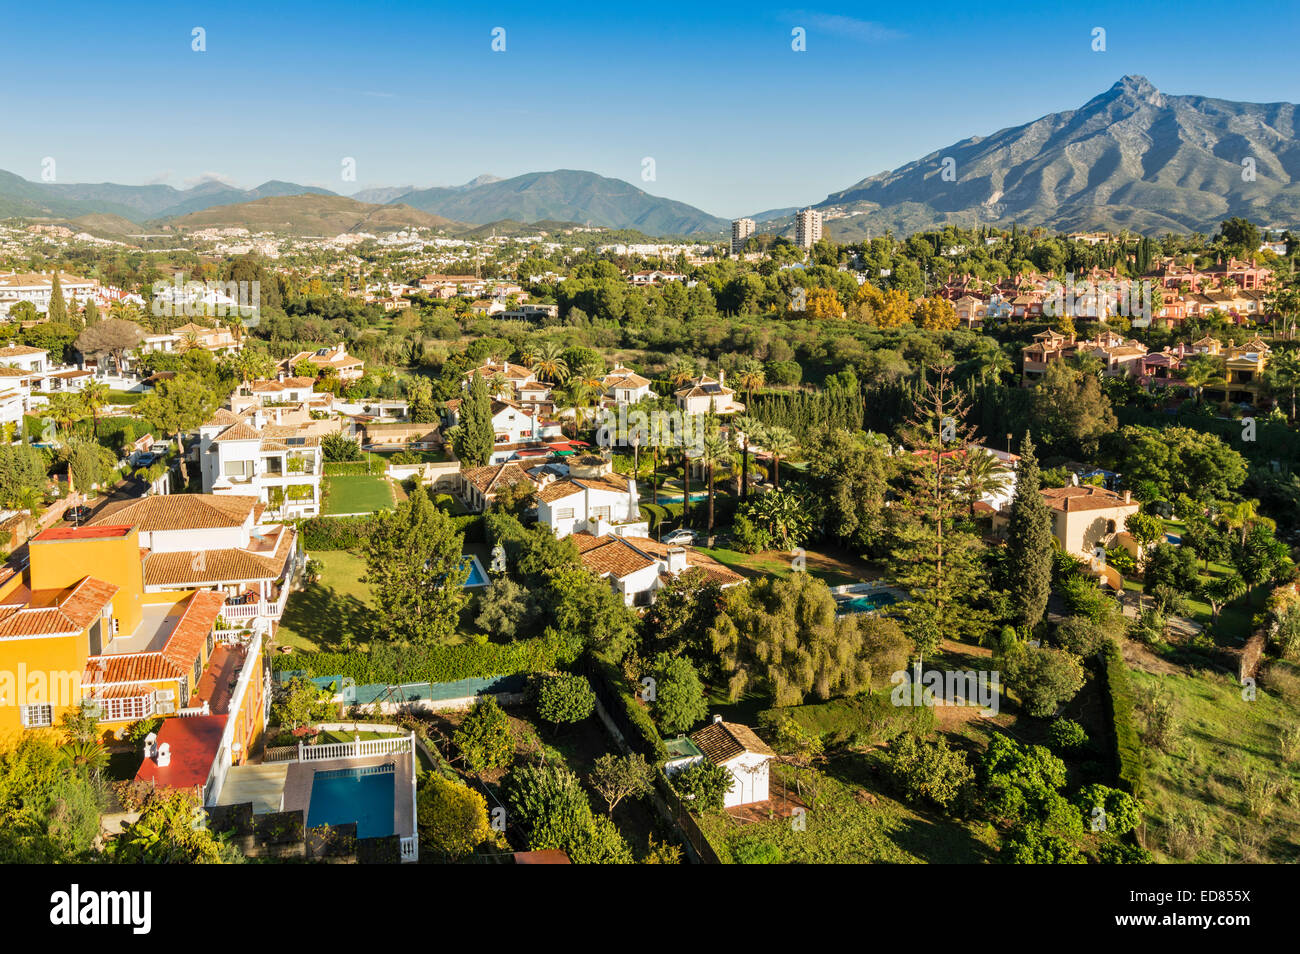 MARBELLA SPAIN INLAND FROM THE COSTA DEL SOL VIEW OF HOUSES AND APARTMENTS Stock Photo